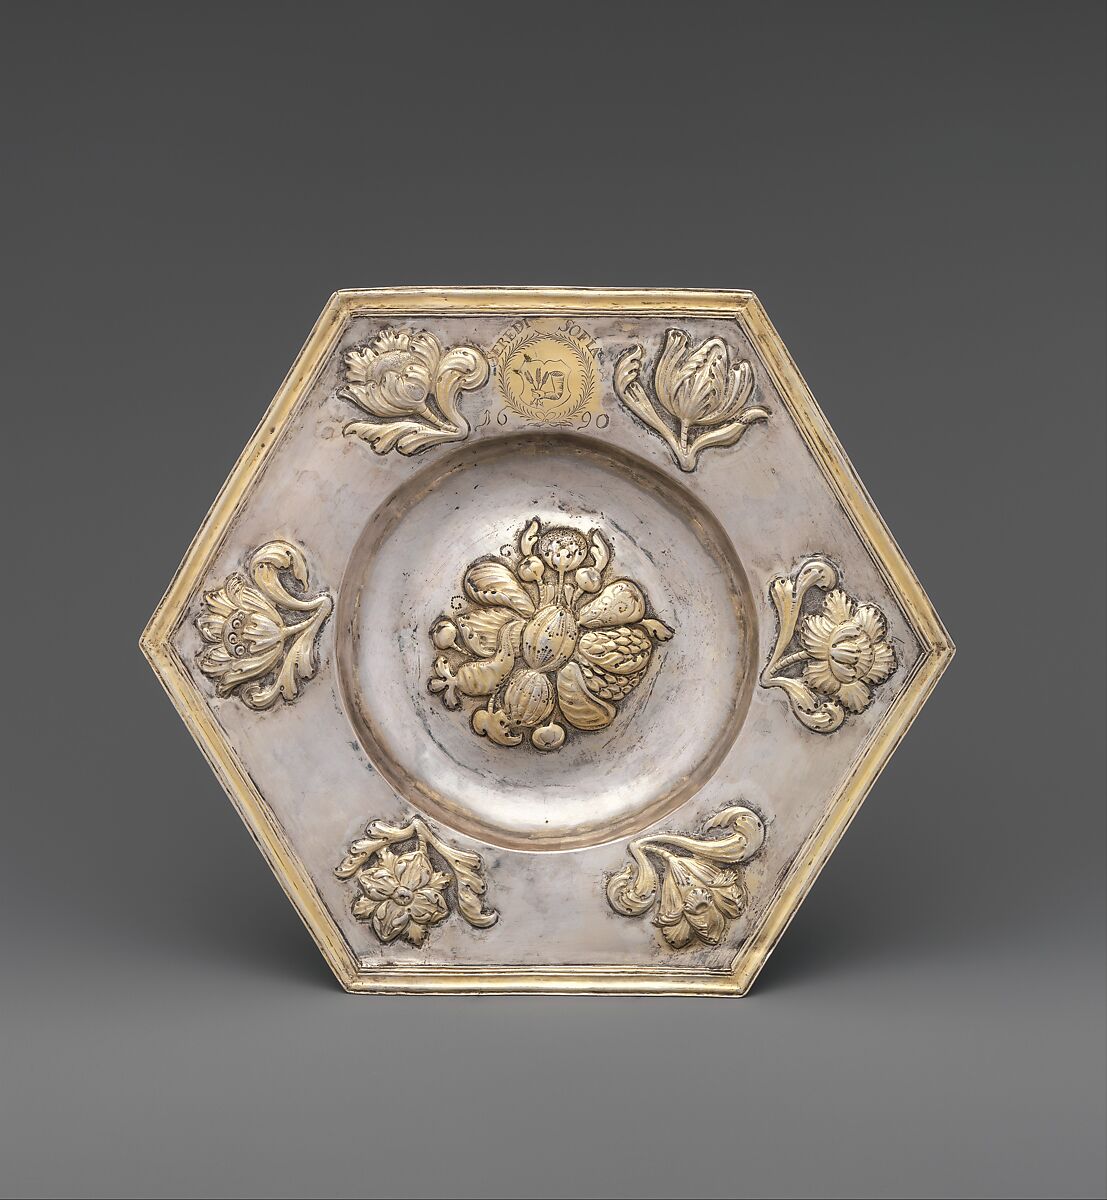 Dish (one of a pair), Silver, partly gilded, Hungarian, possibly Transylvania 